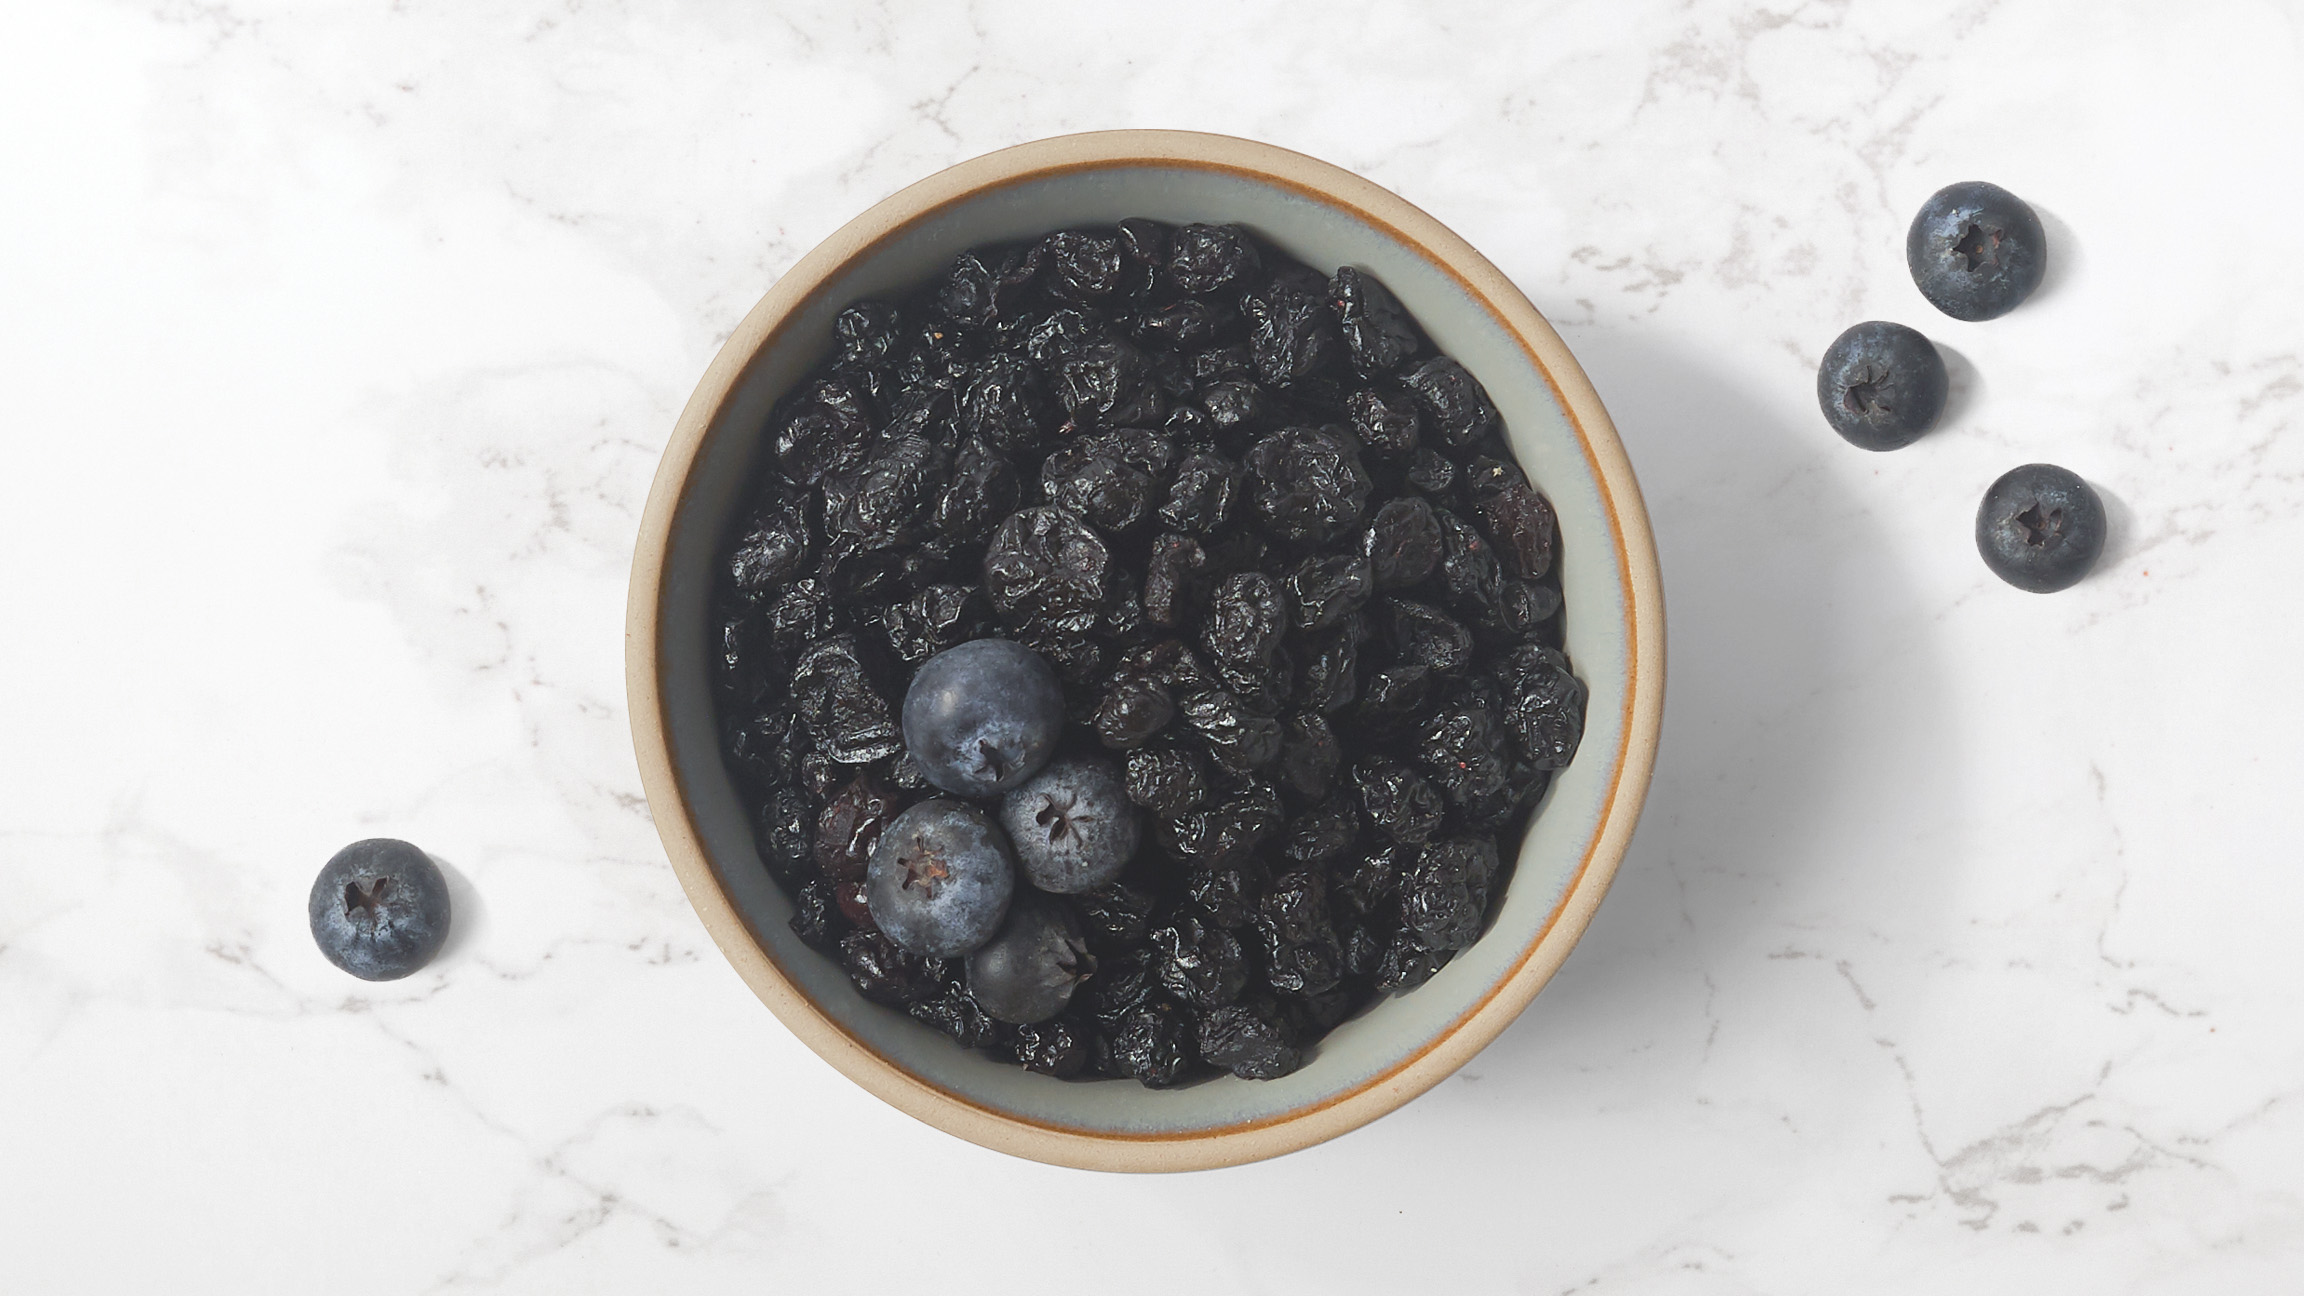 Dried blueberries in a ceramic bowl with fresh blueberries scattered on a marble counter